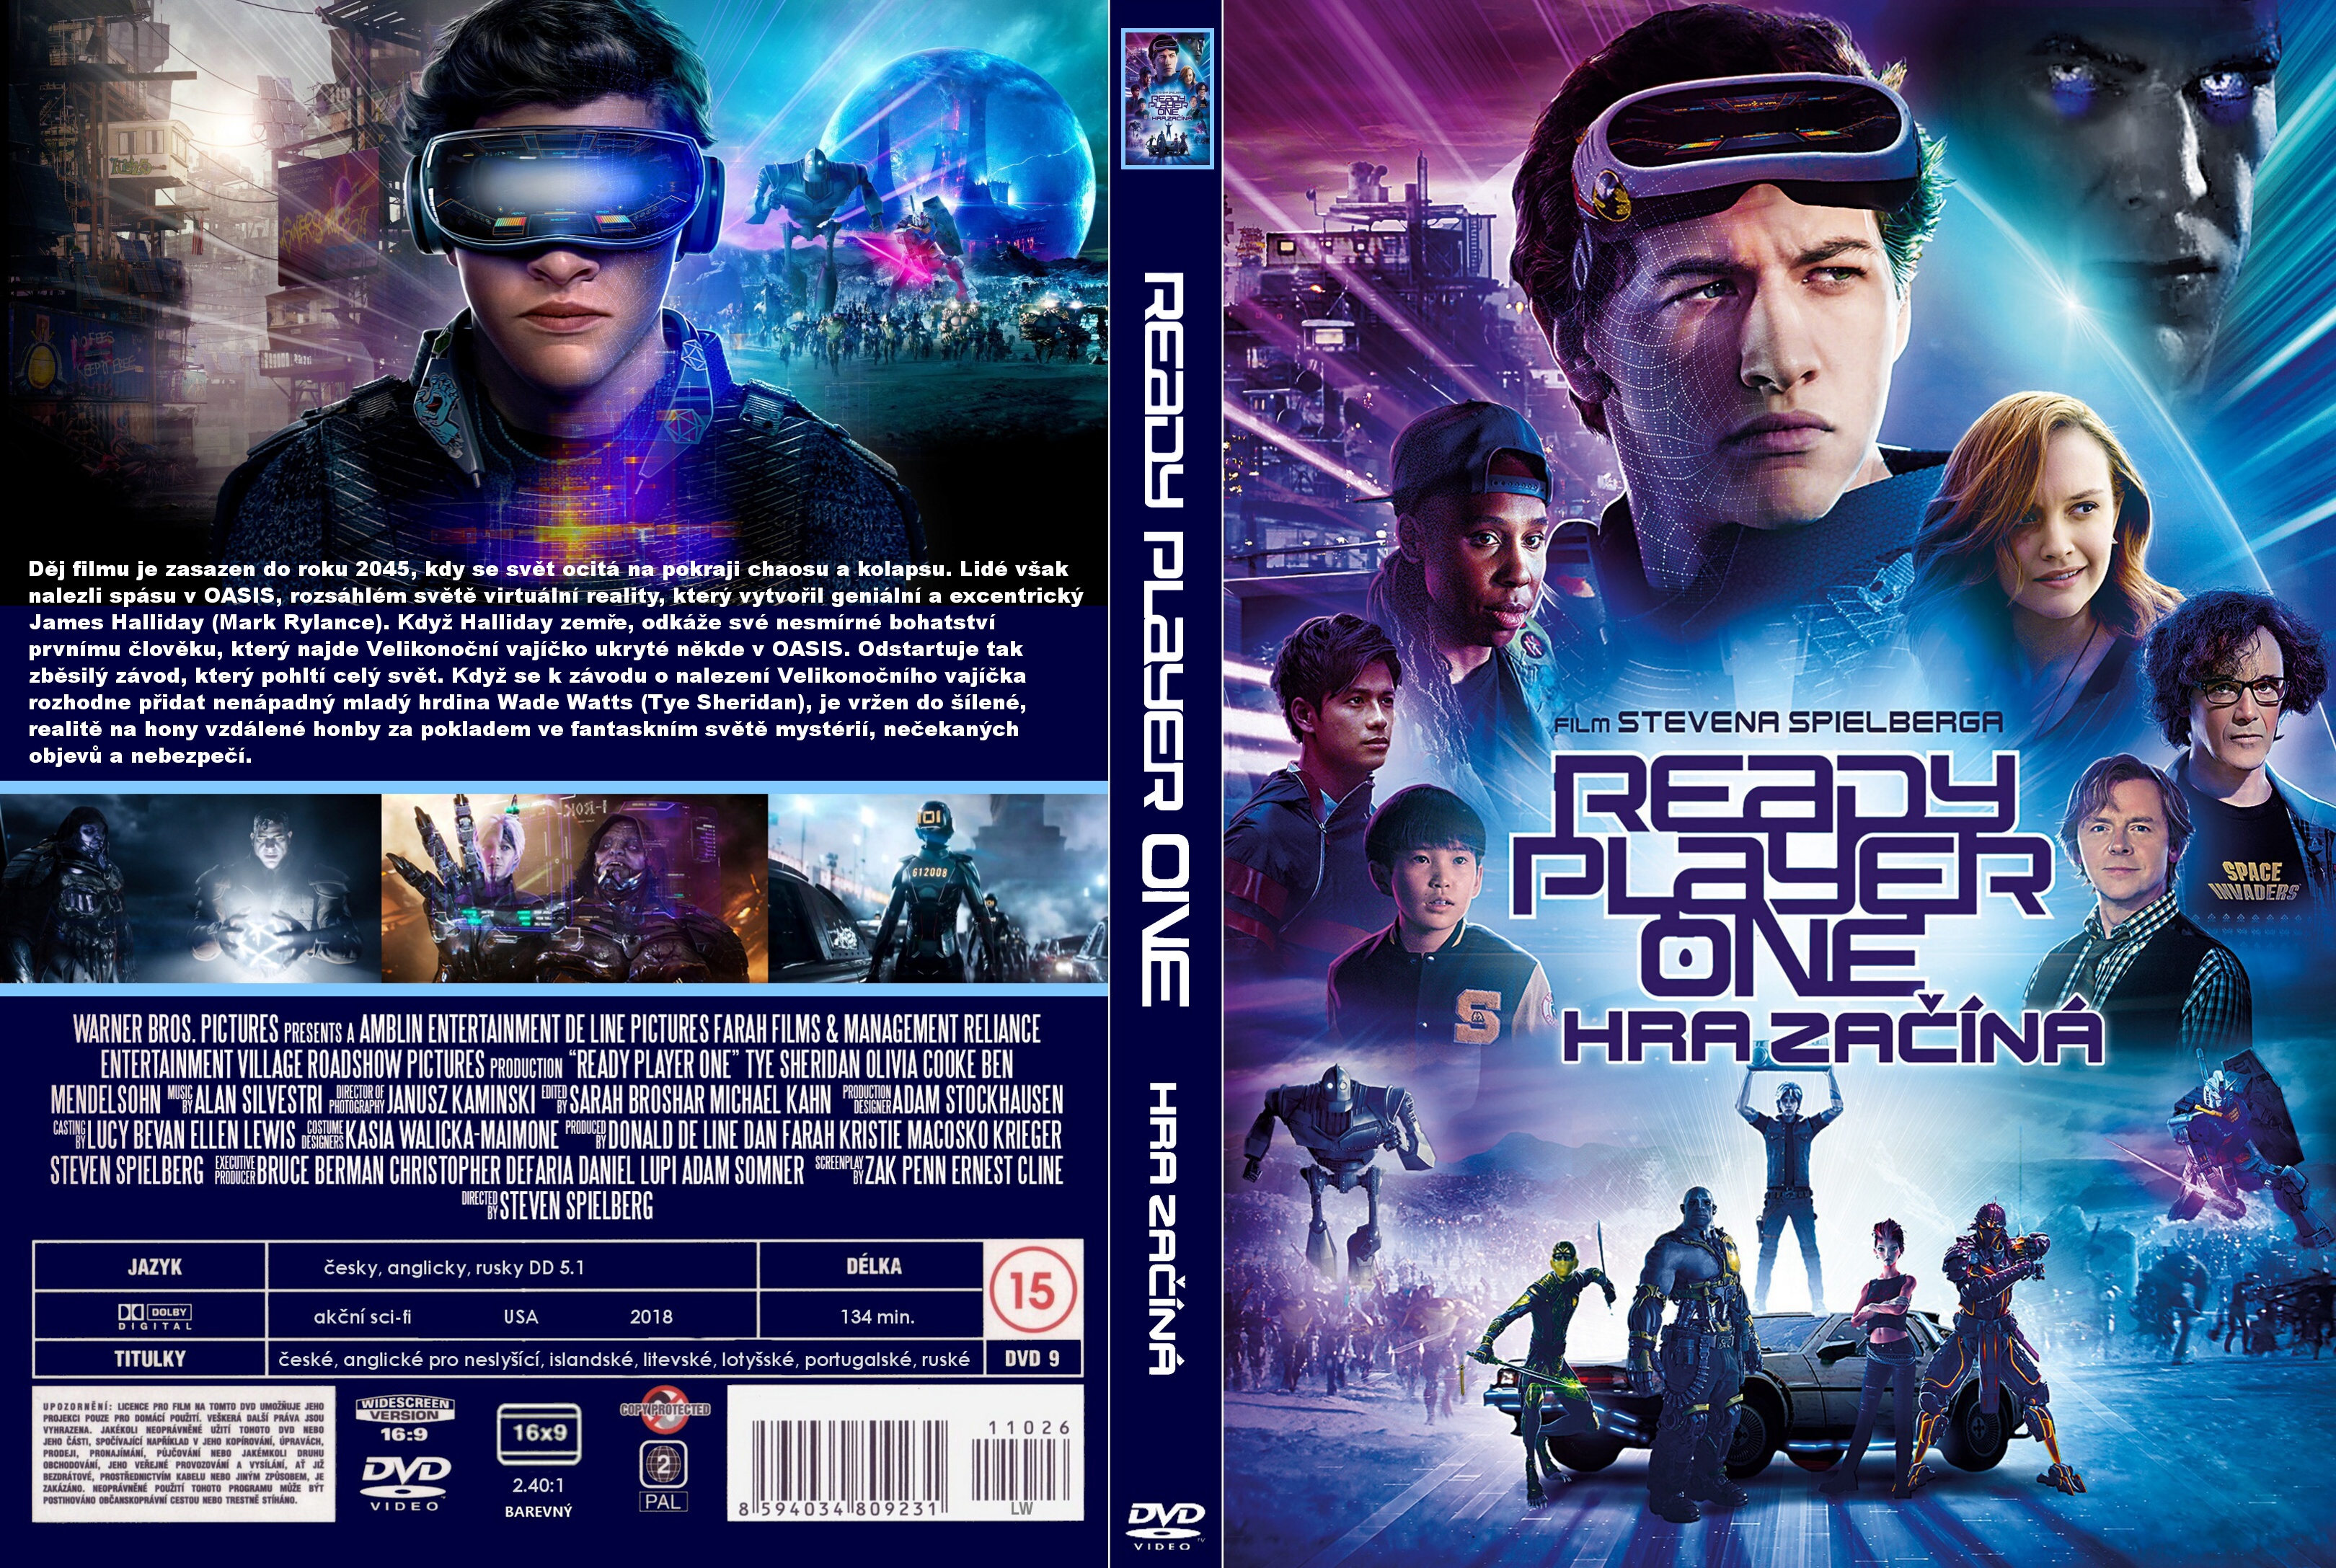 READY PLAYER ONE (2 DVD)